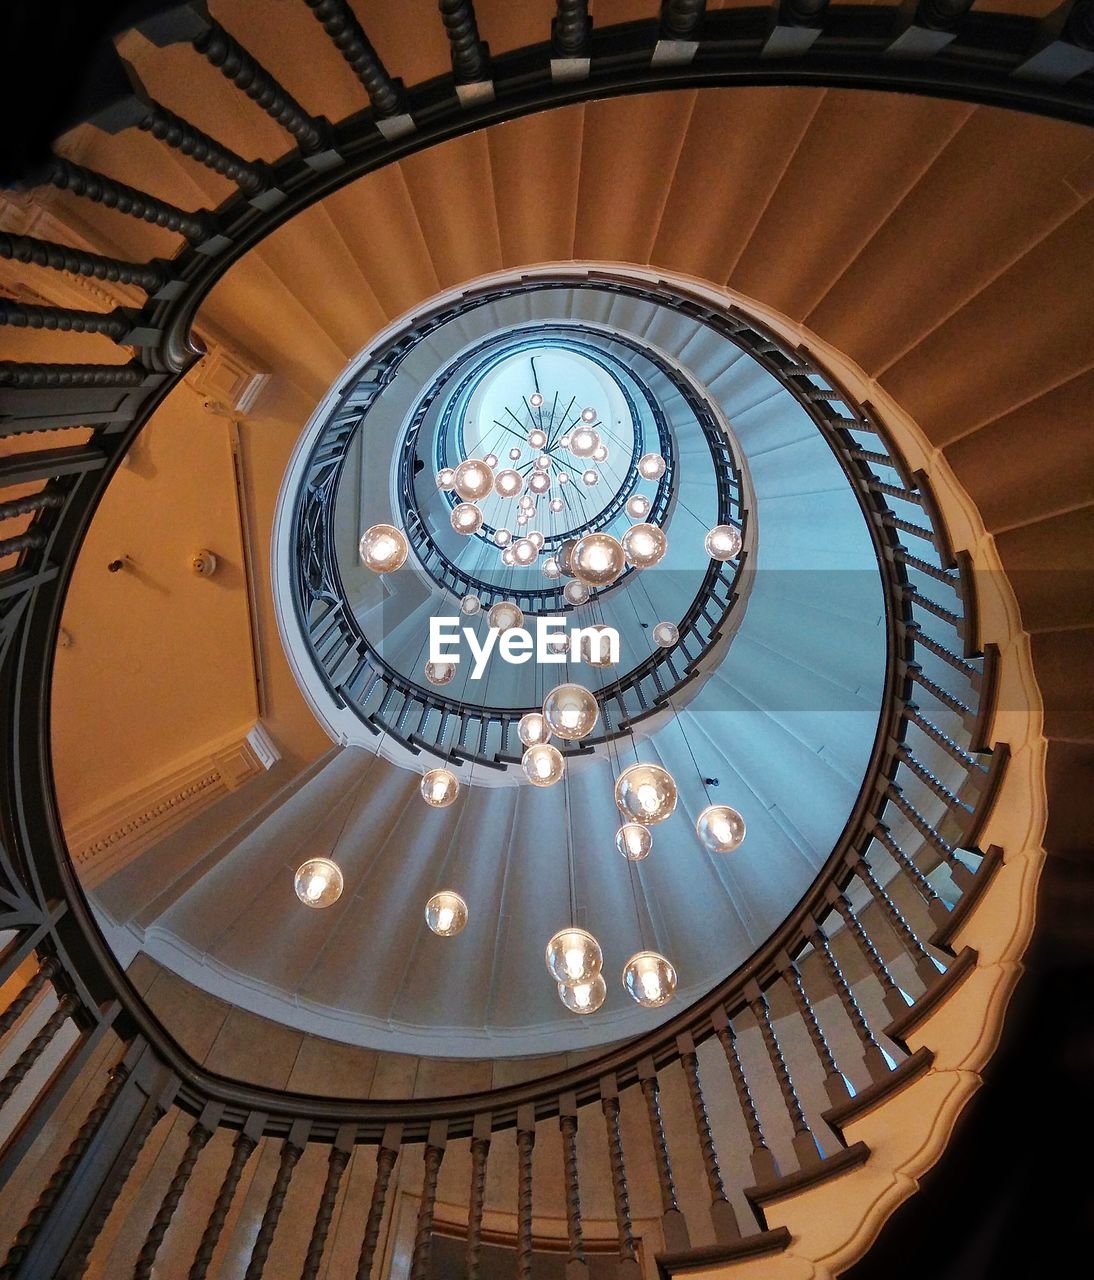 Directly below shot of decorations amidst spiral staircases in building